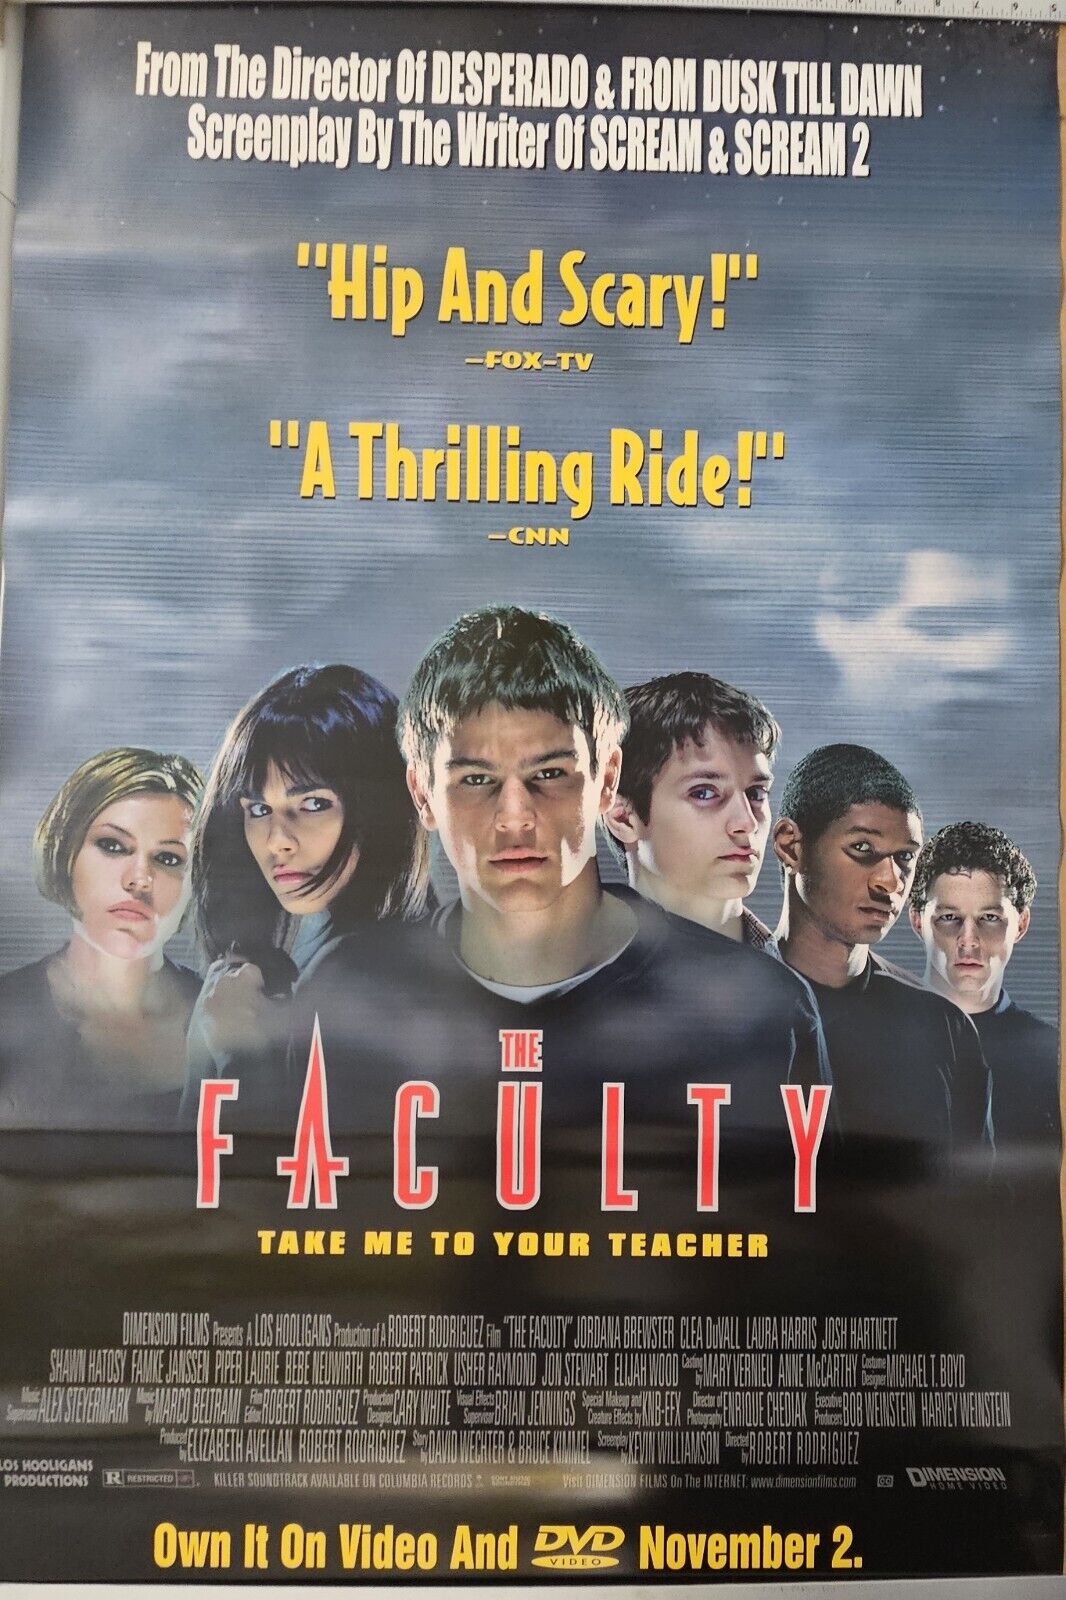 Amazing Horror Movie The Faculty 26 x 39.75  DVD promotional Movie poster draft